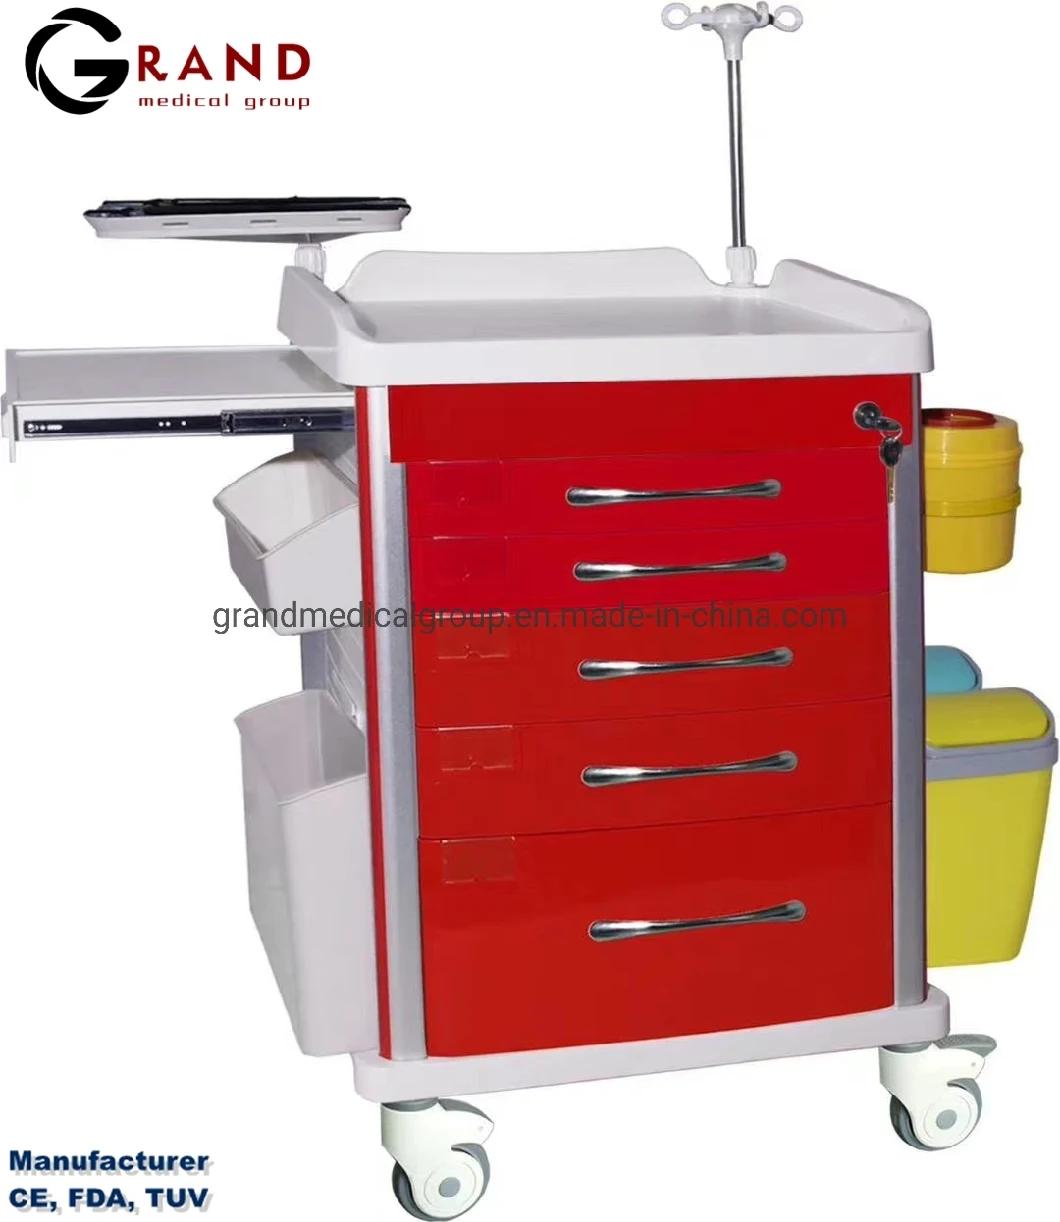 Factory Price Hospital Clinic Cart Movable Medicine Transfusion ABS Emergency Surgical Trolley Medical Equipment